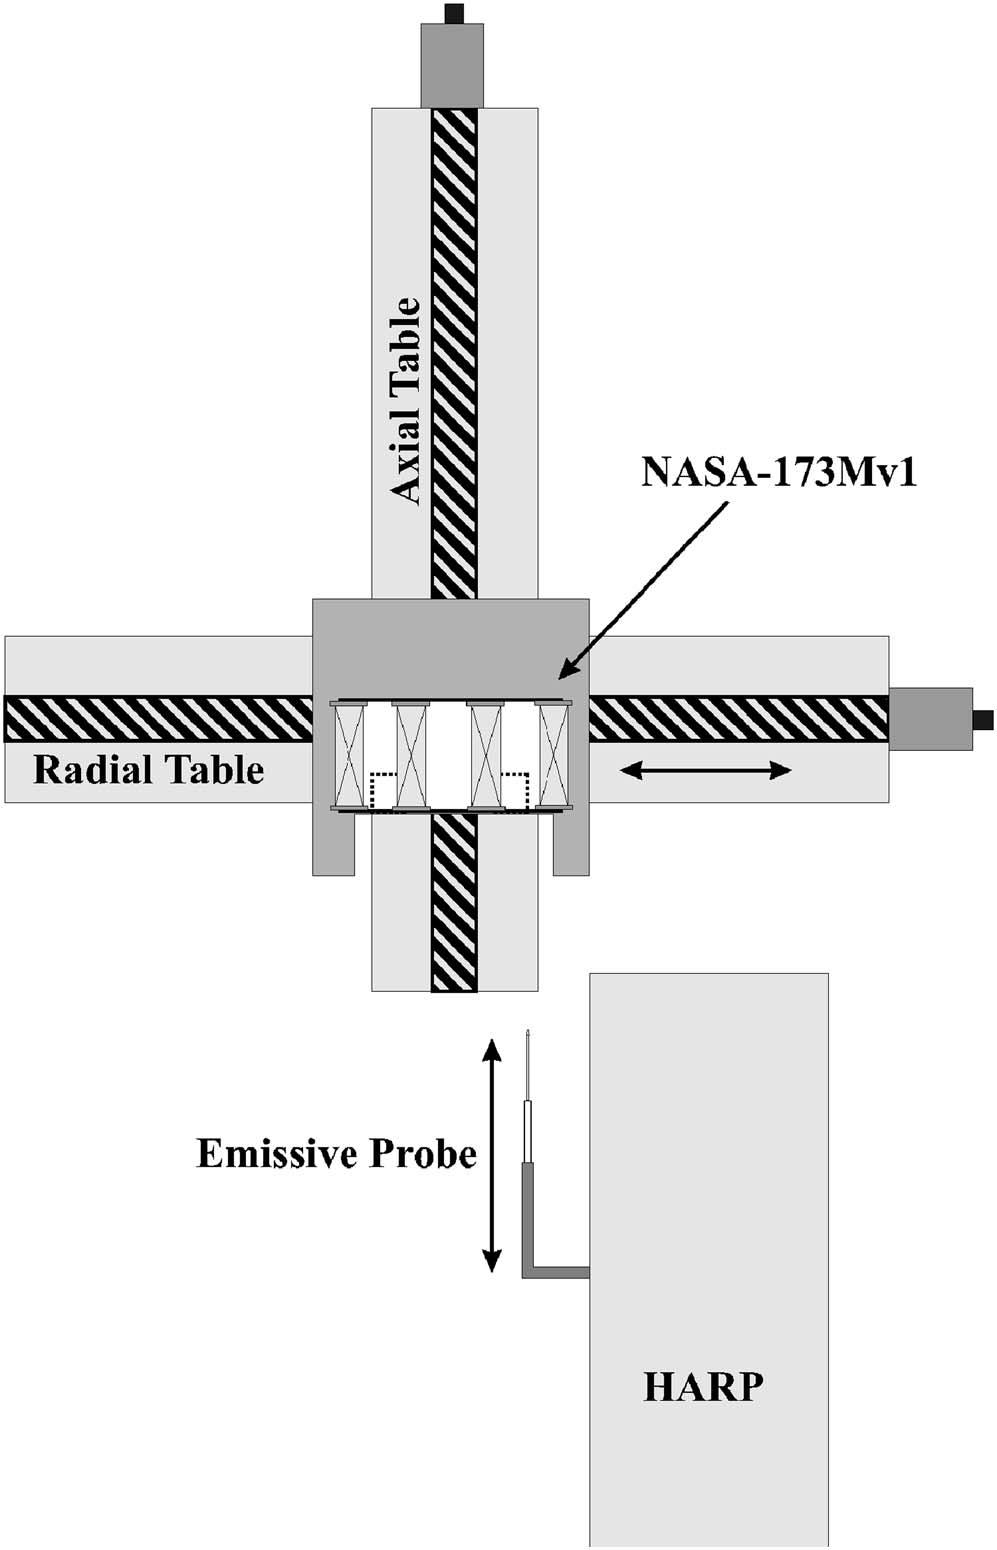 093502-2 J. A. Linnell and A. D. Gallimore Phys. Plasmas 13, 093502 2006 FIG. 1. Internal floating emissive probe experimental setup. As shown in Fig.